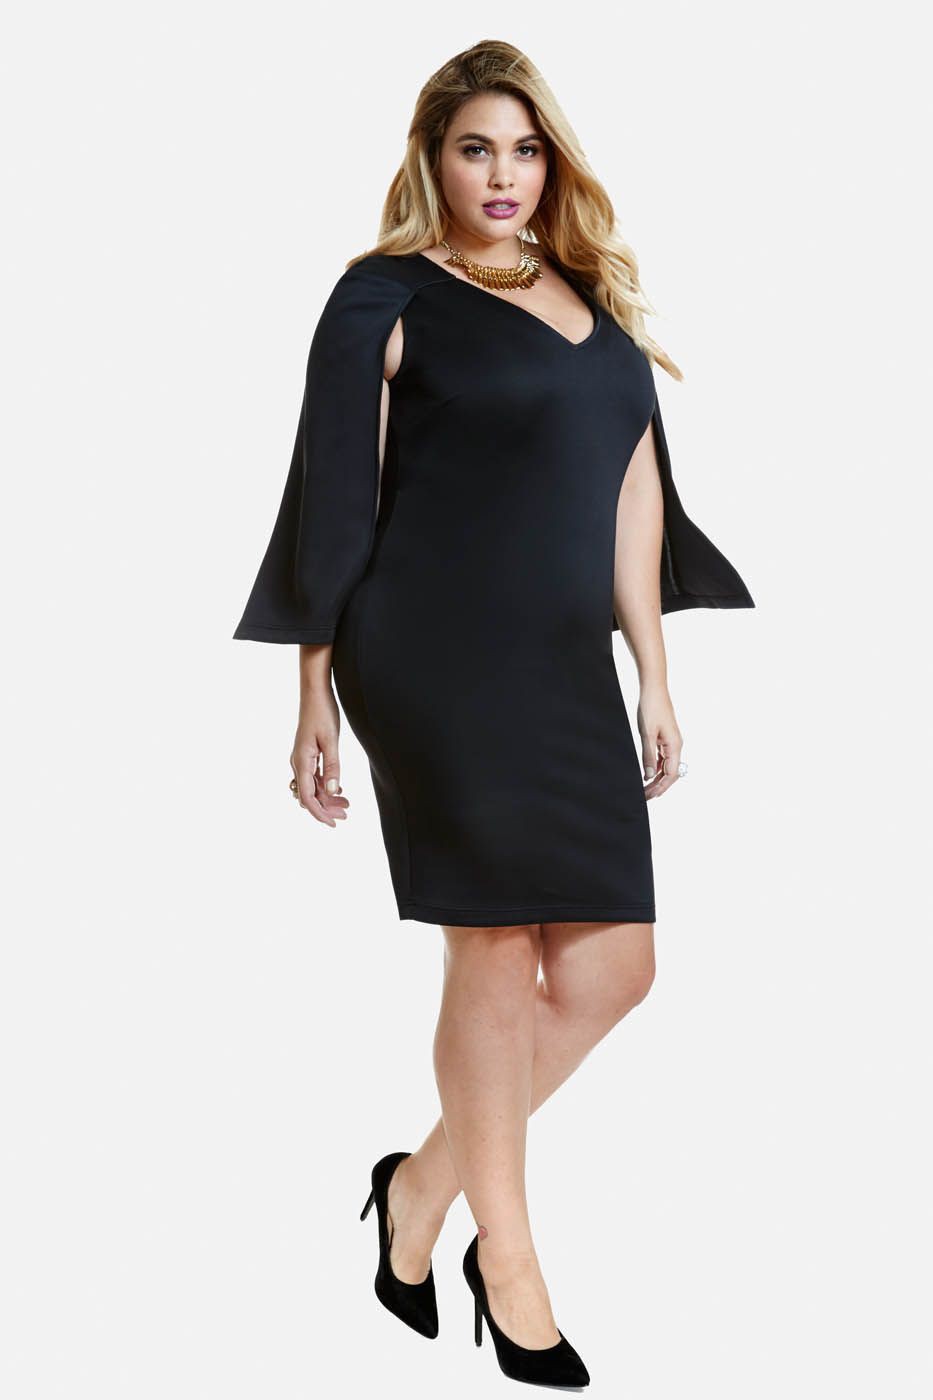 Plus Size Clothing and Fashion for Women Trendy Cocktail Dress For Plus ...